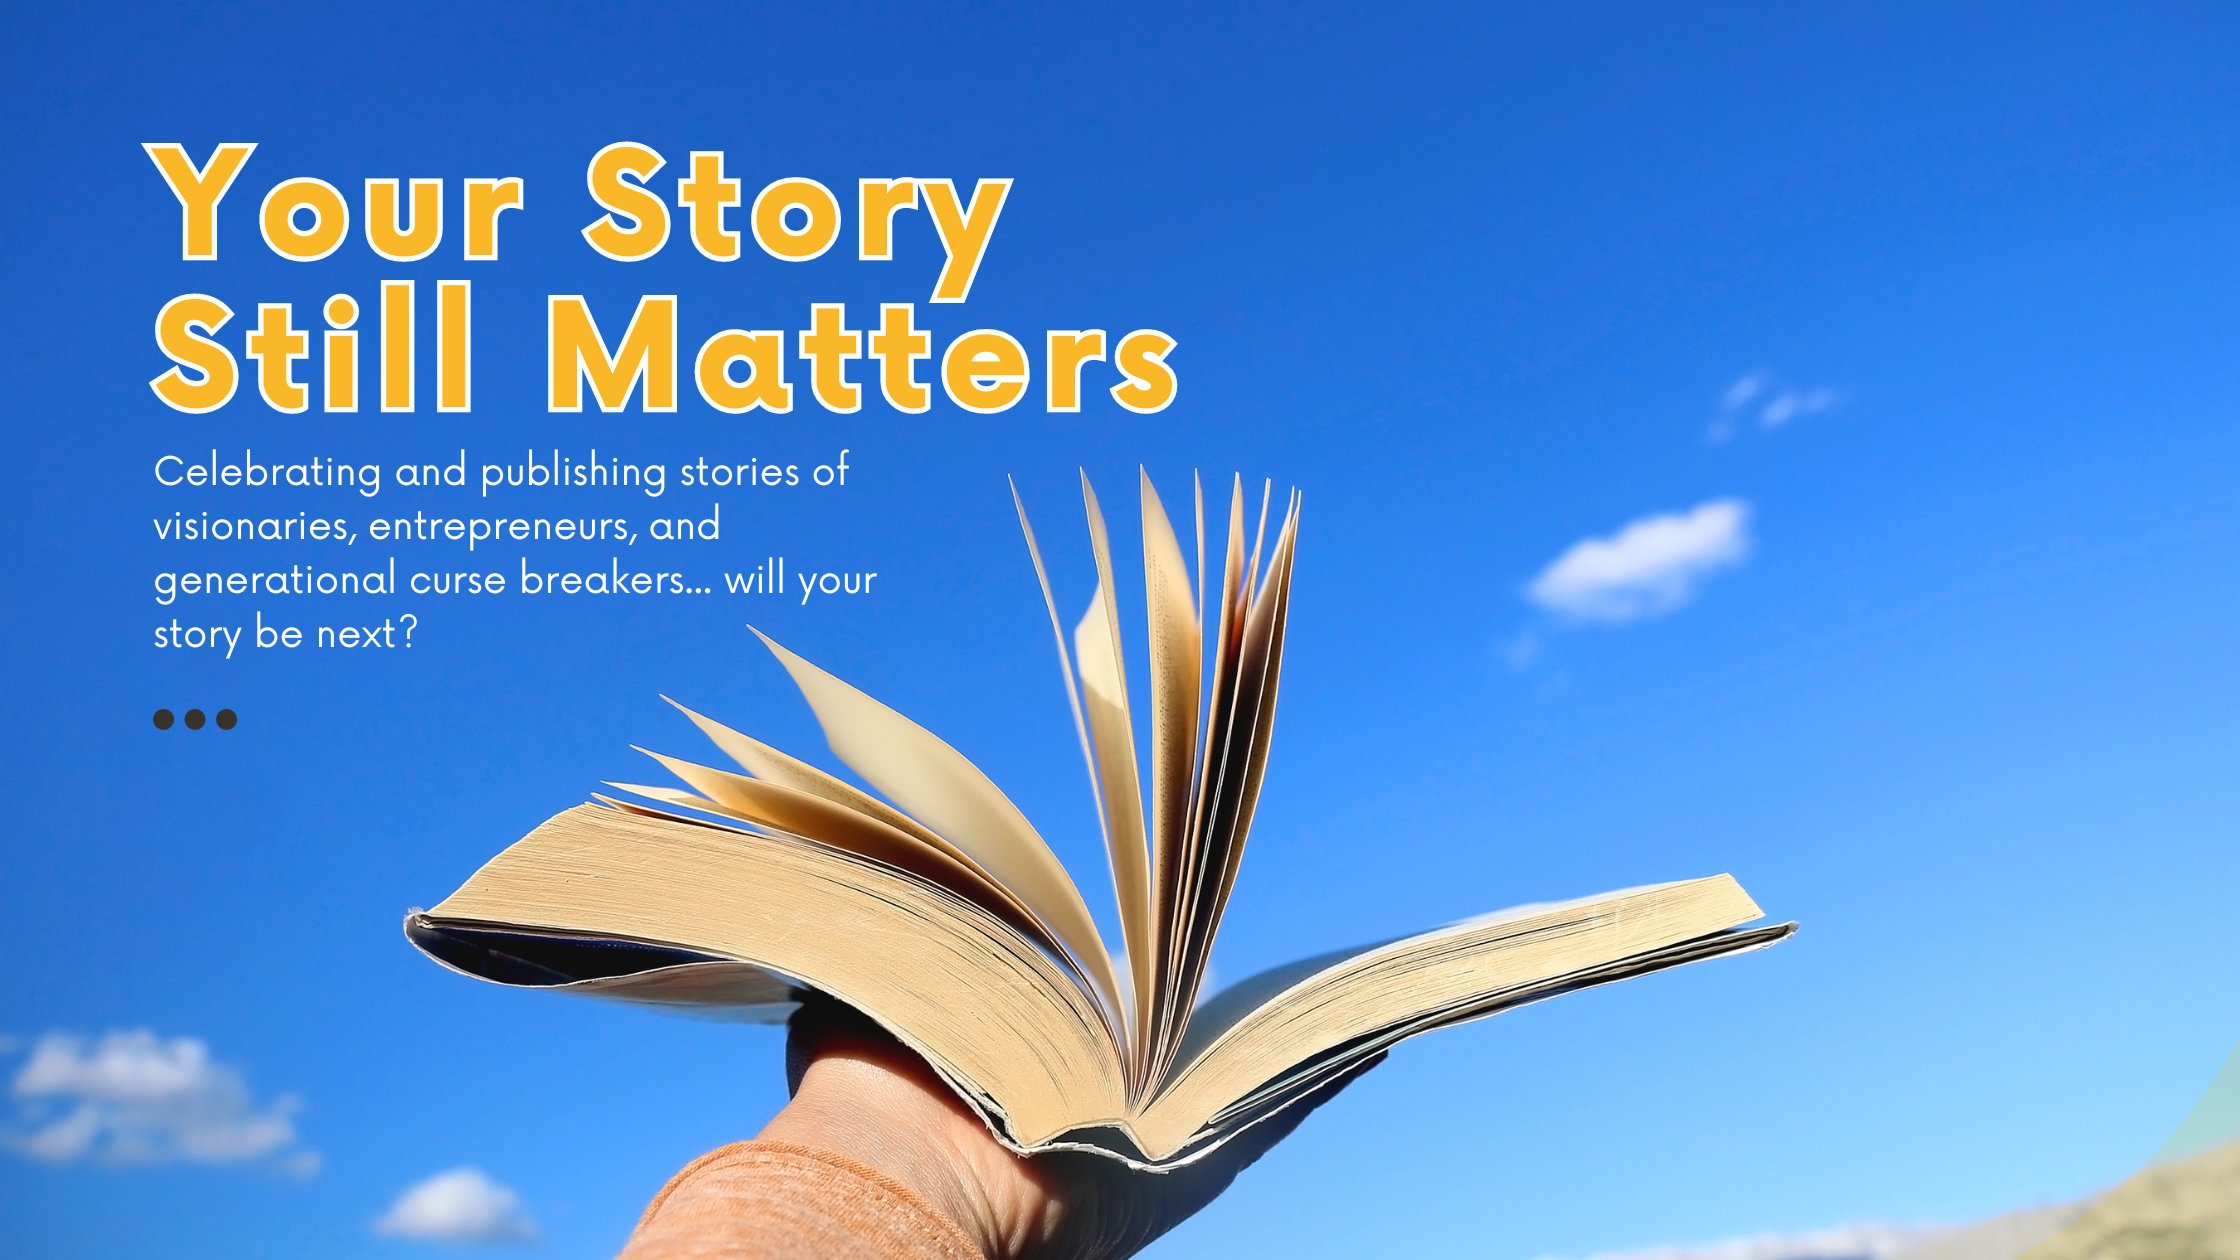 Because Your Story Still Matters....